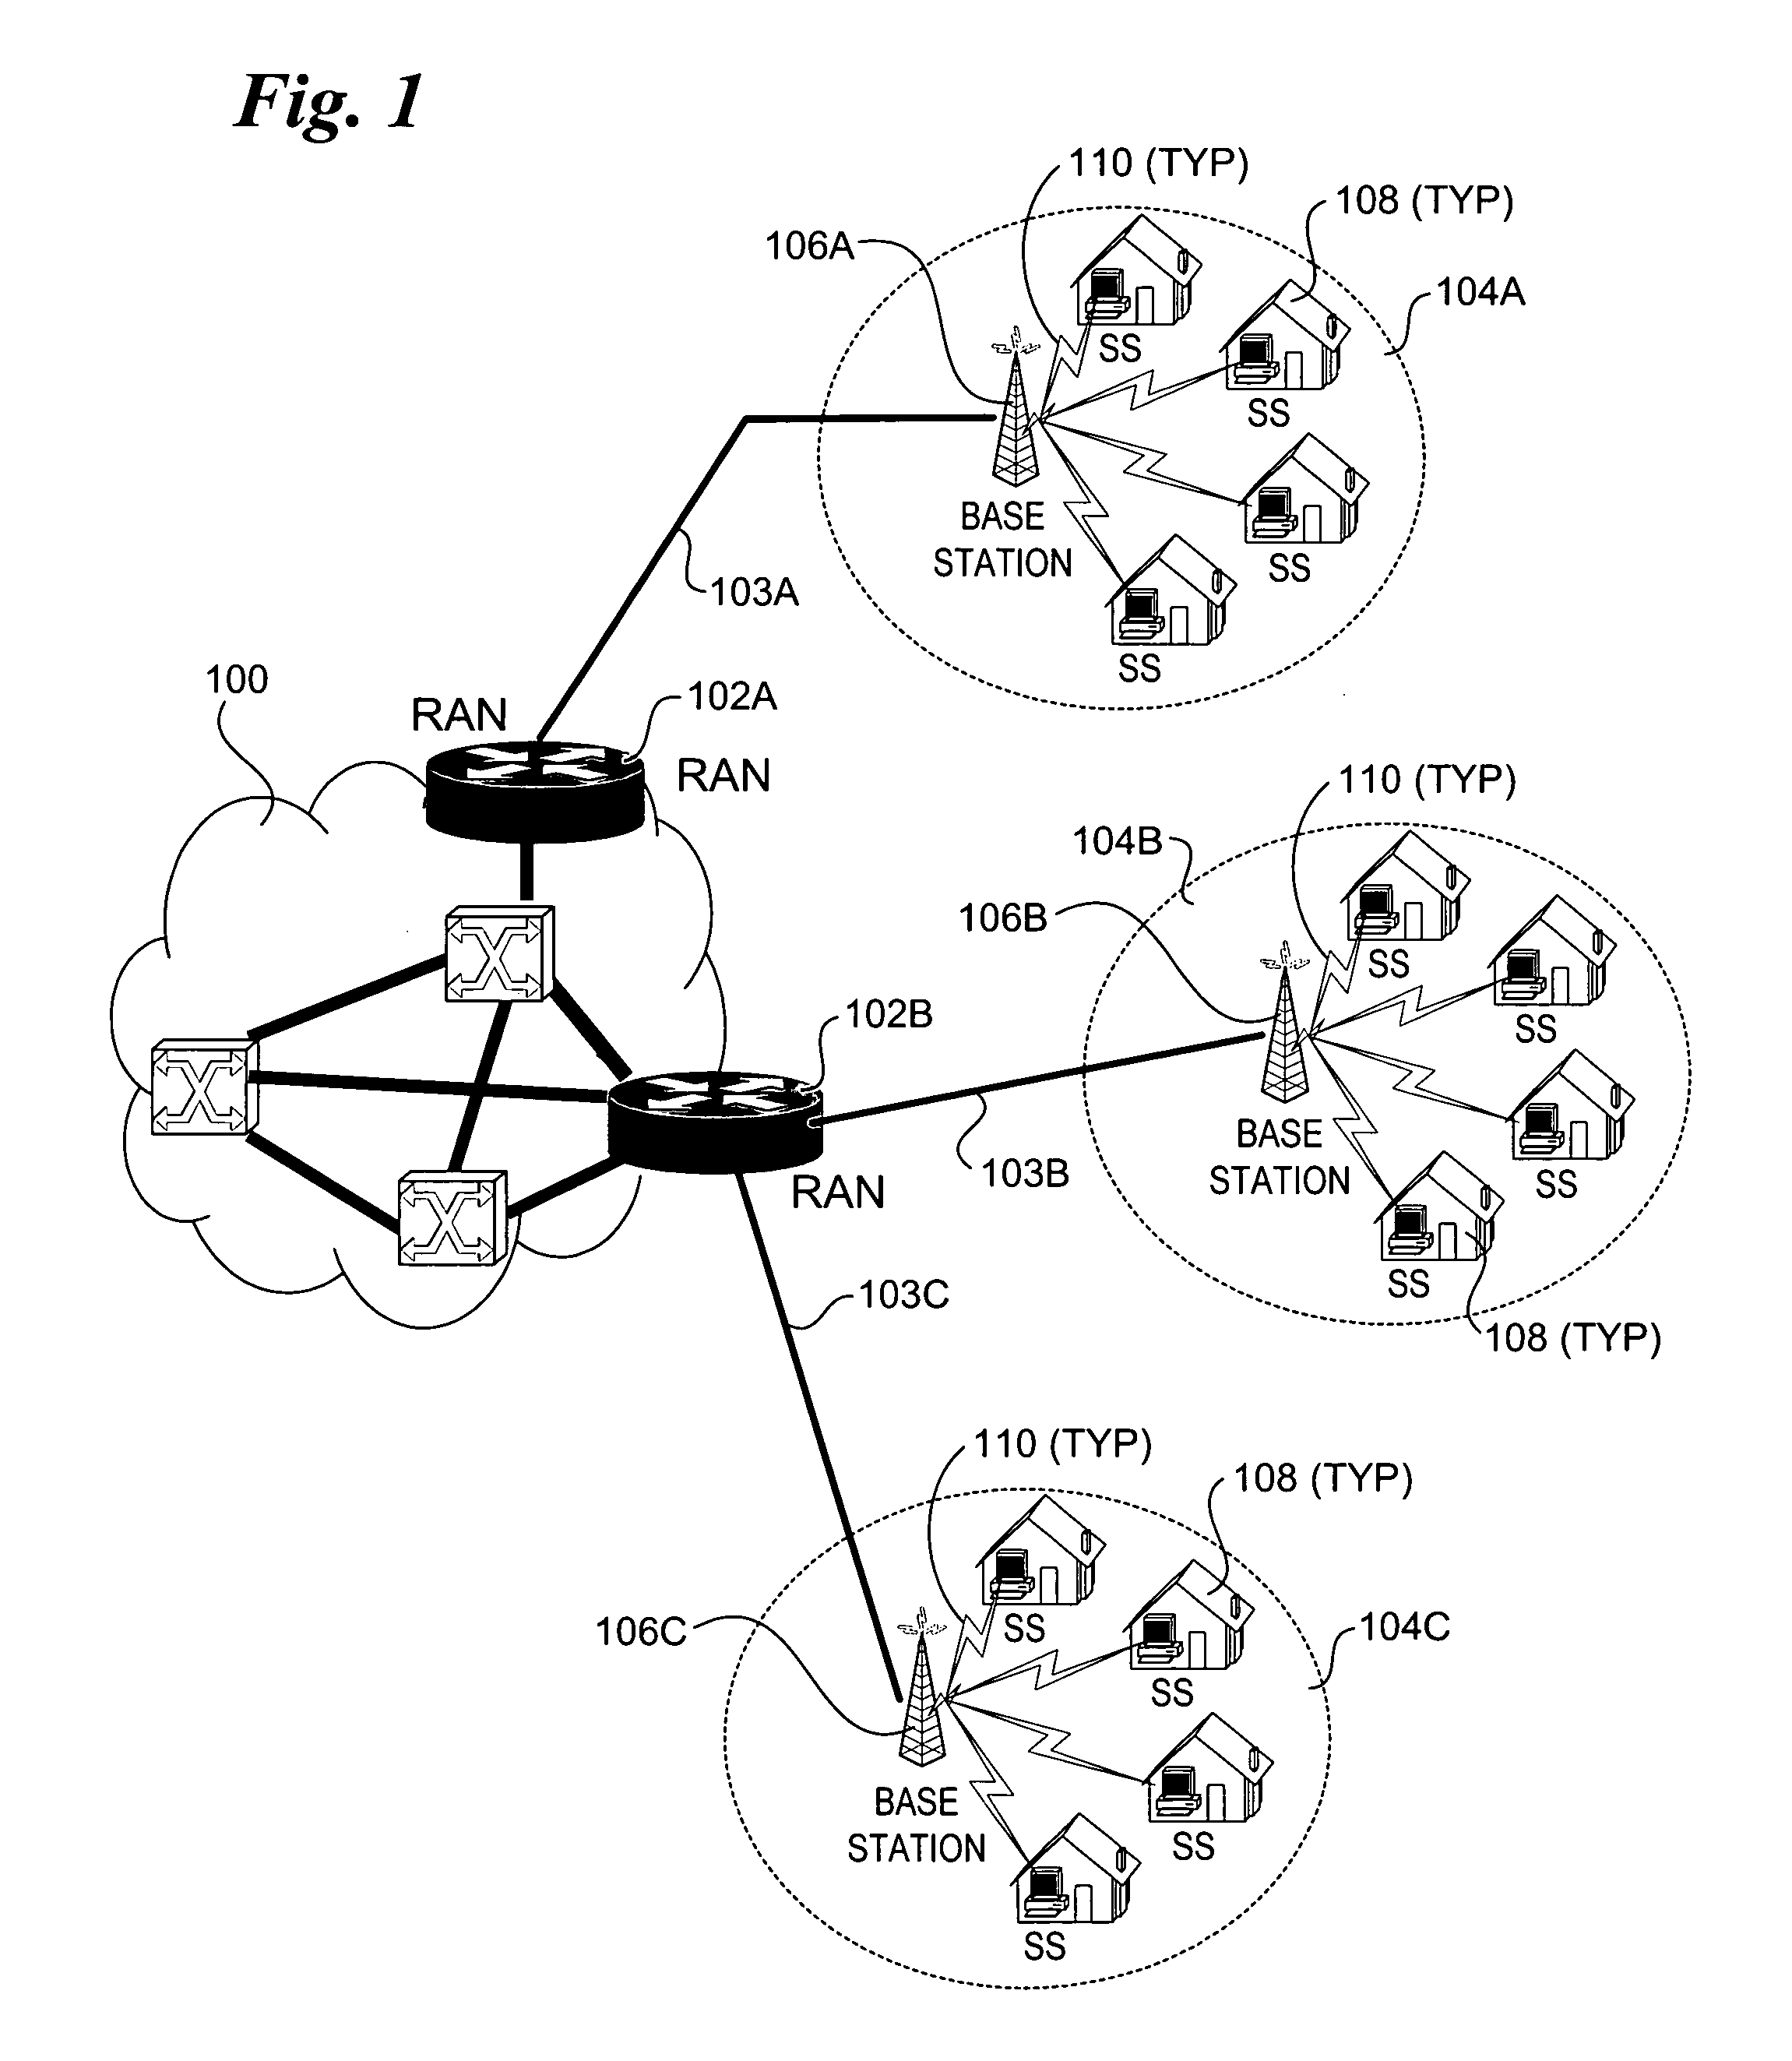 Method and apparatus to authenticate base and subscriber stations and secure sessions for broadband wireless networks